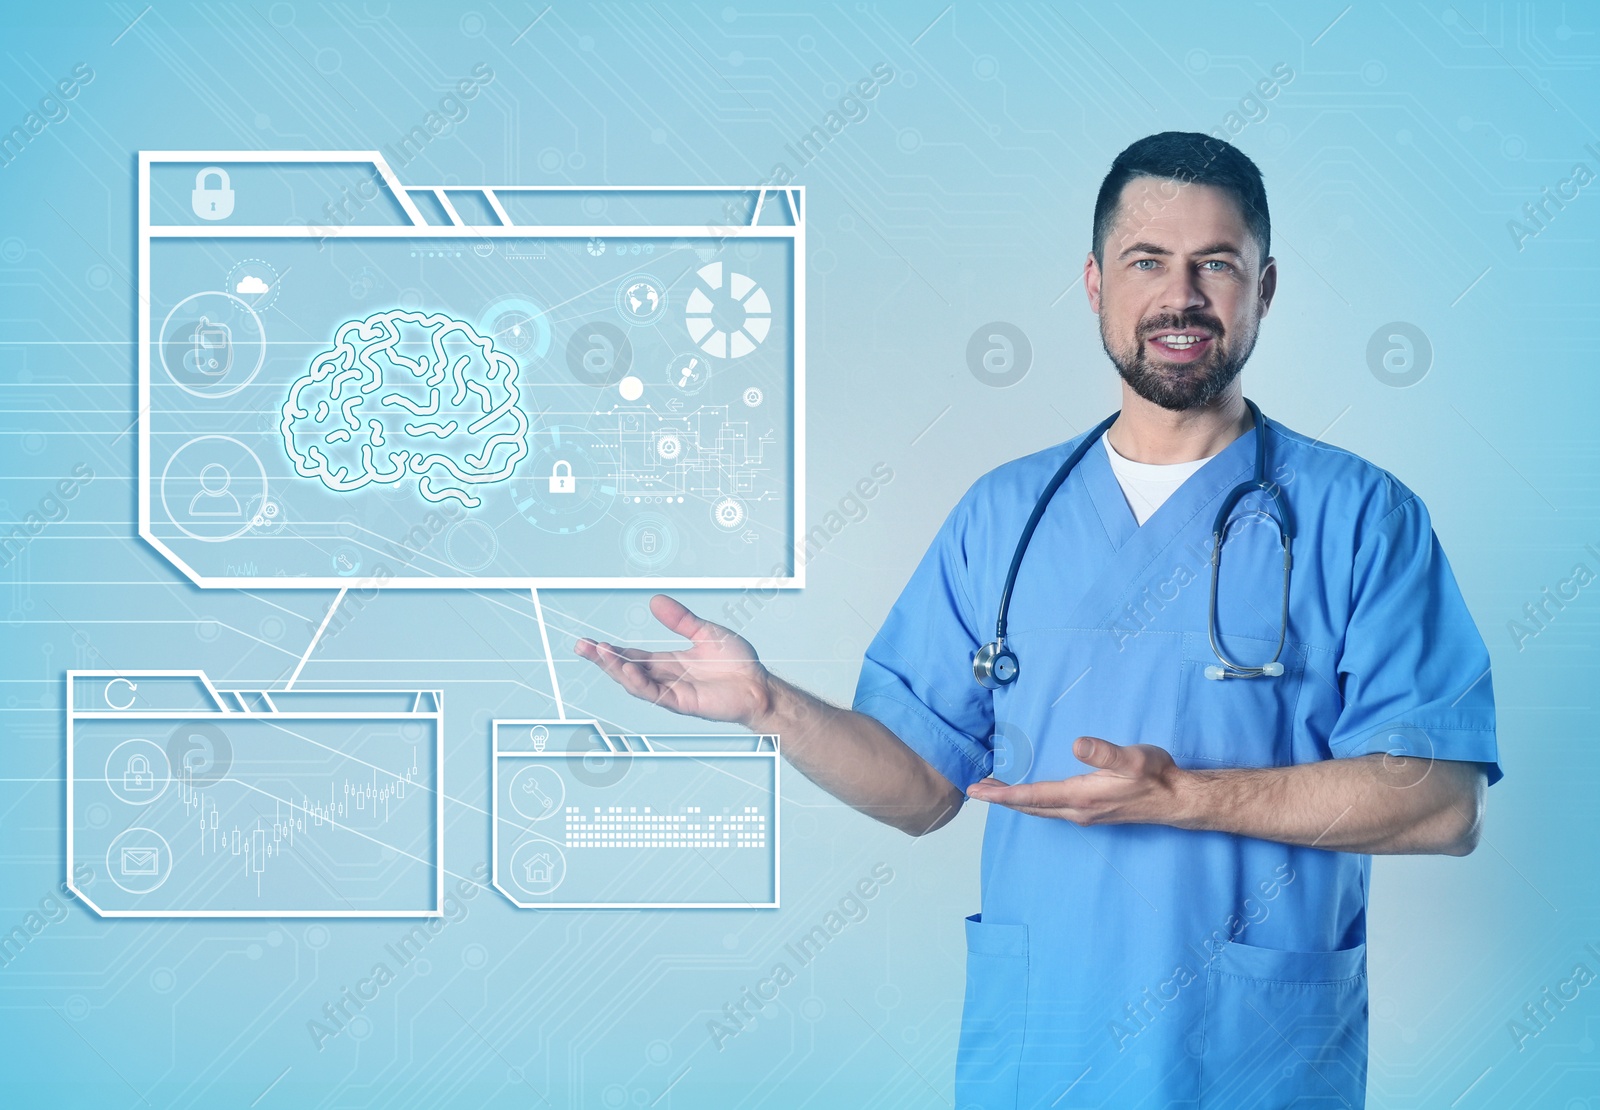 Image of Mature doctor demonstrating machine learning model on blue background